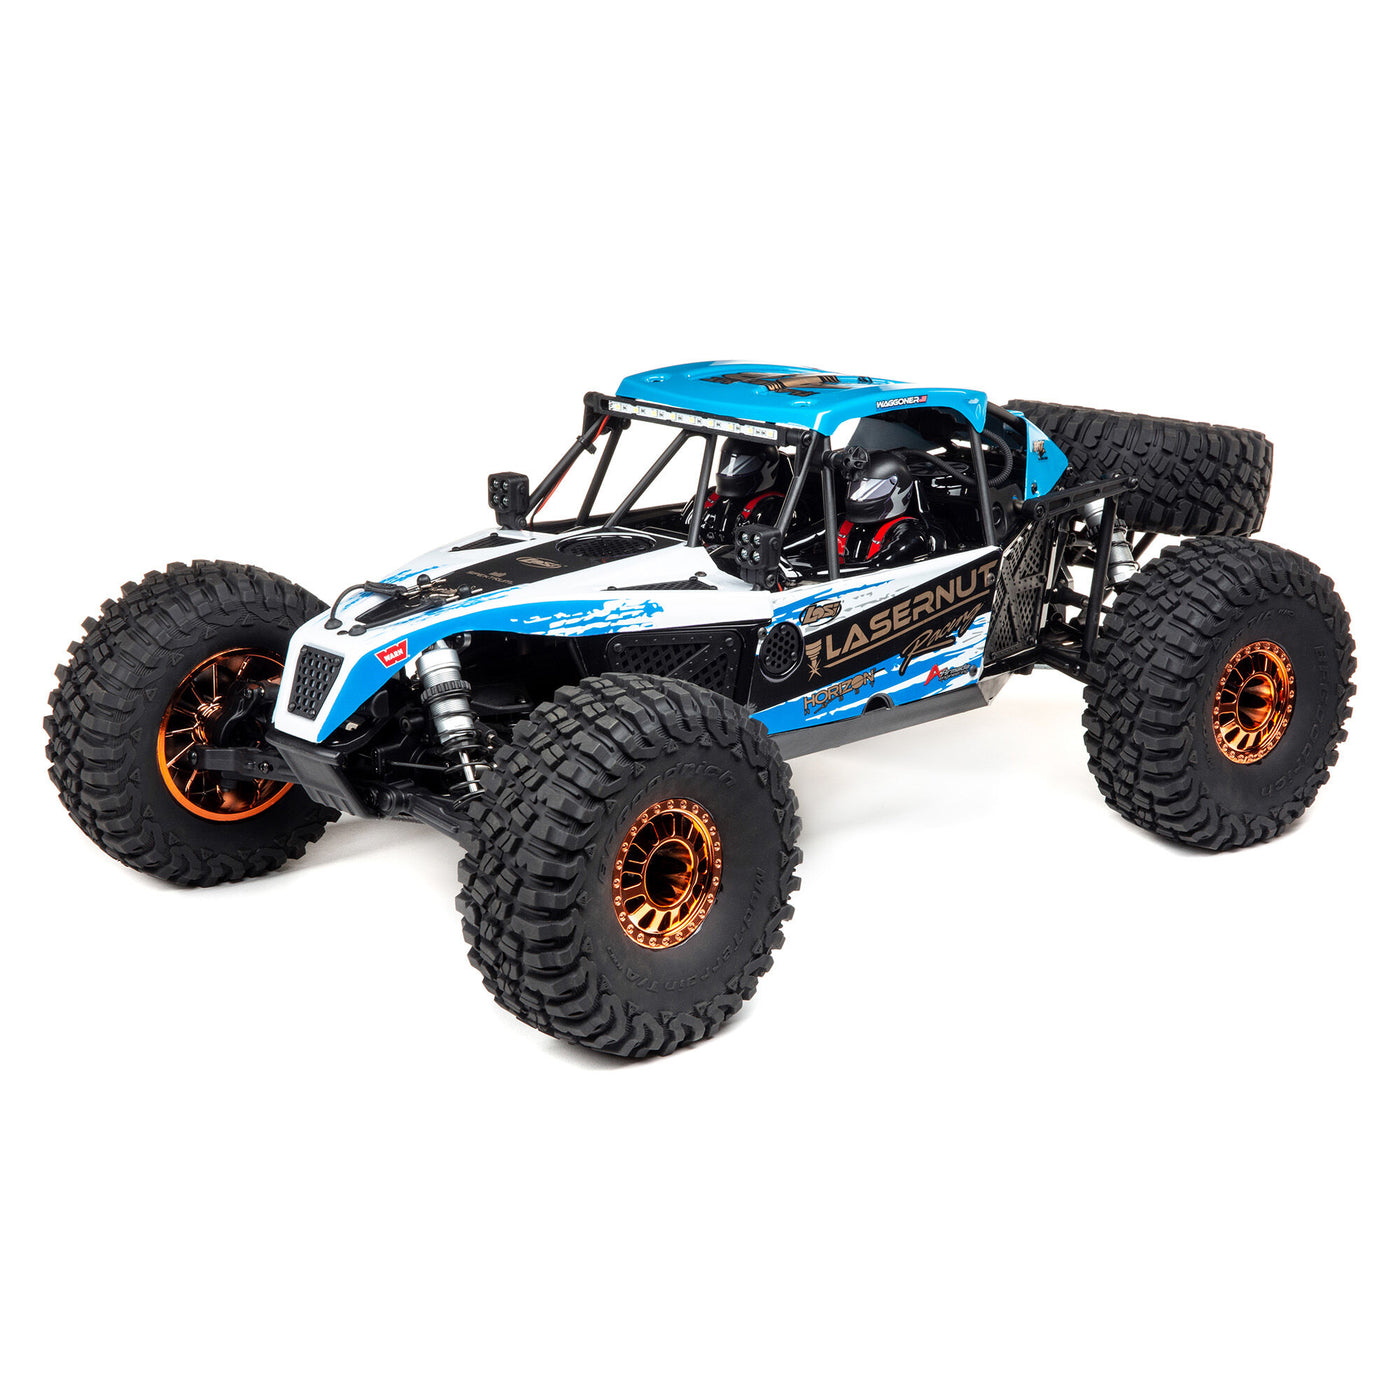 1/10 Lasernut U4 4WD Brushless RTR with Smart and AVC LOSI 03028